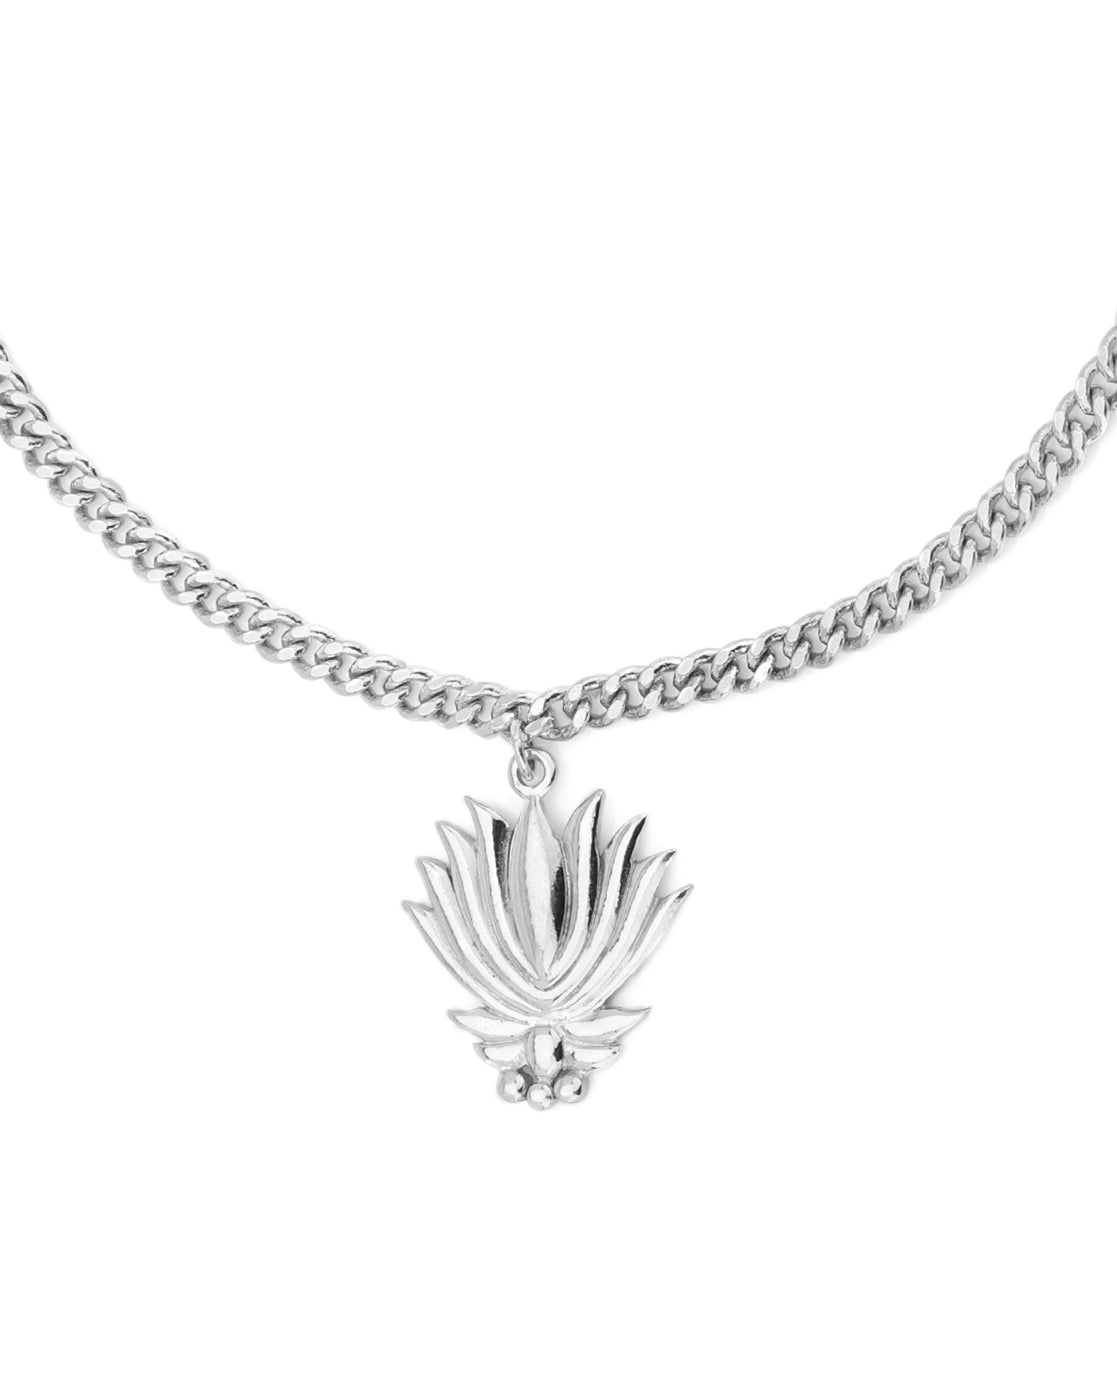 Carlton London -Set Of 2 Rhodium-Plated Silver Toned Lotus Shape Silver Beaded Anklets For Women